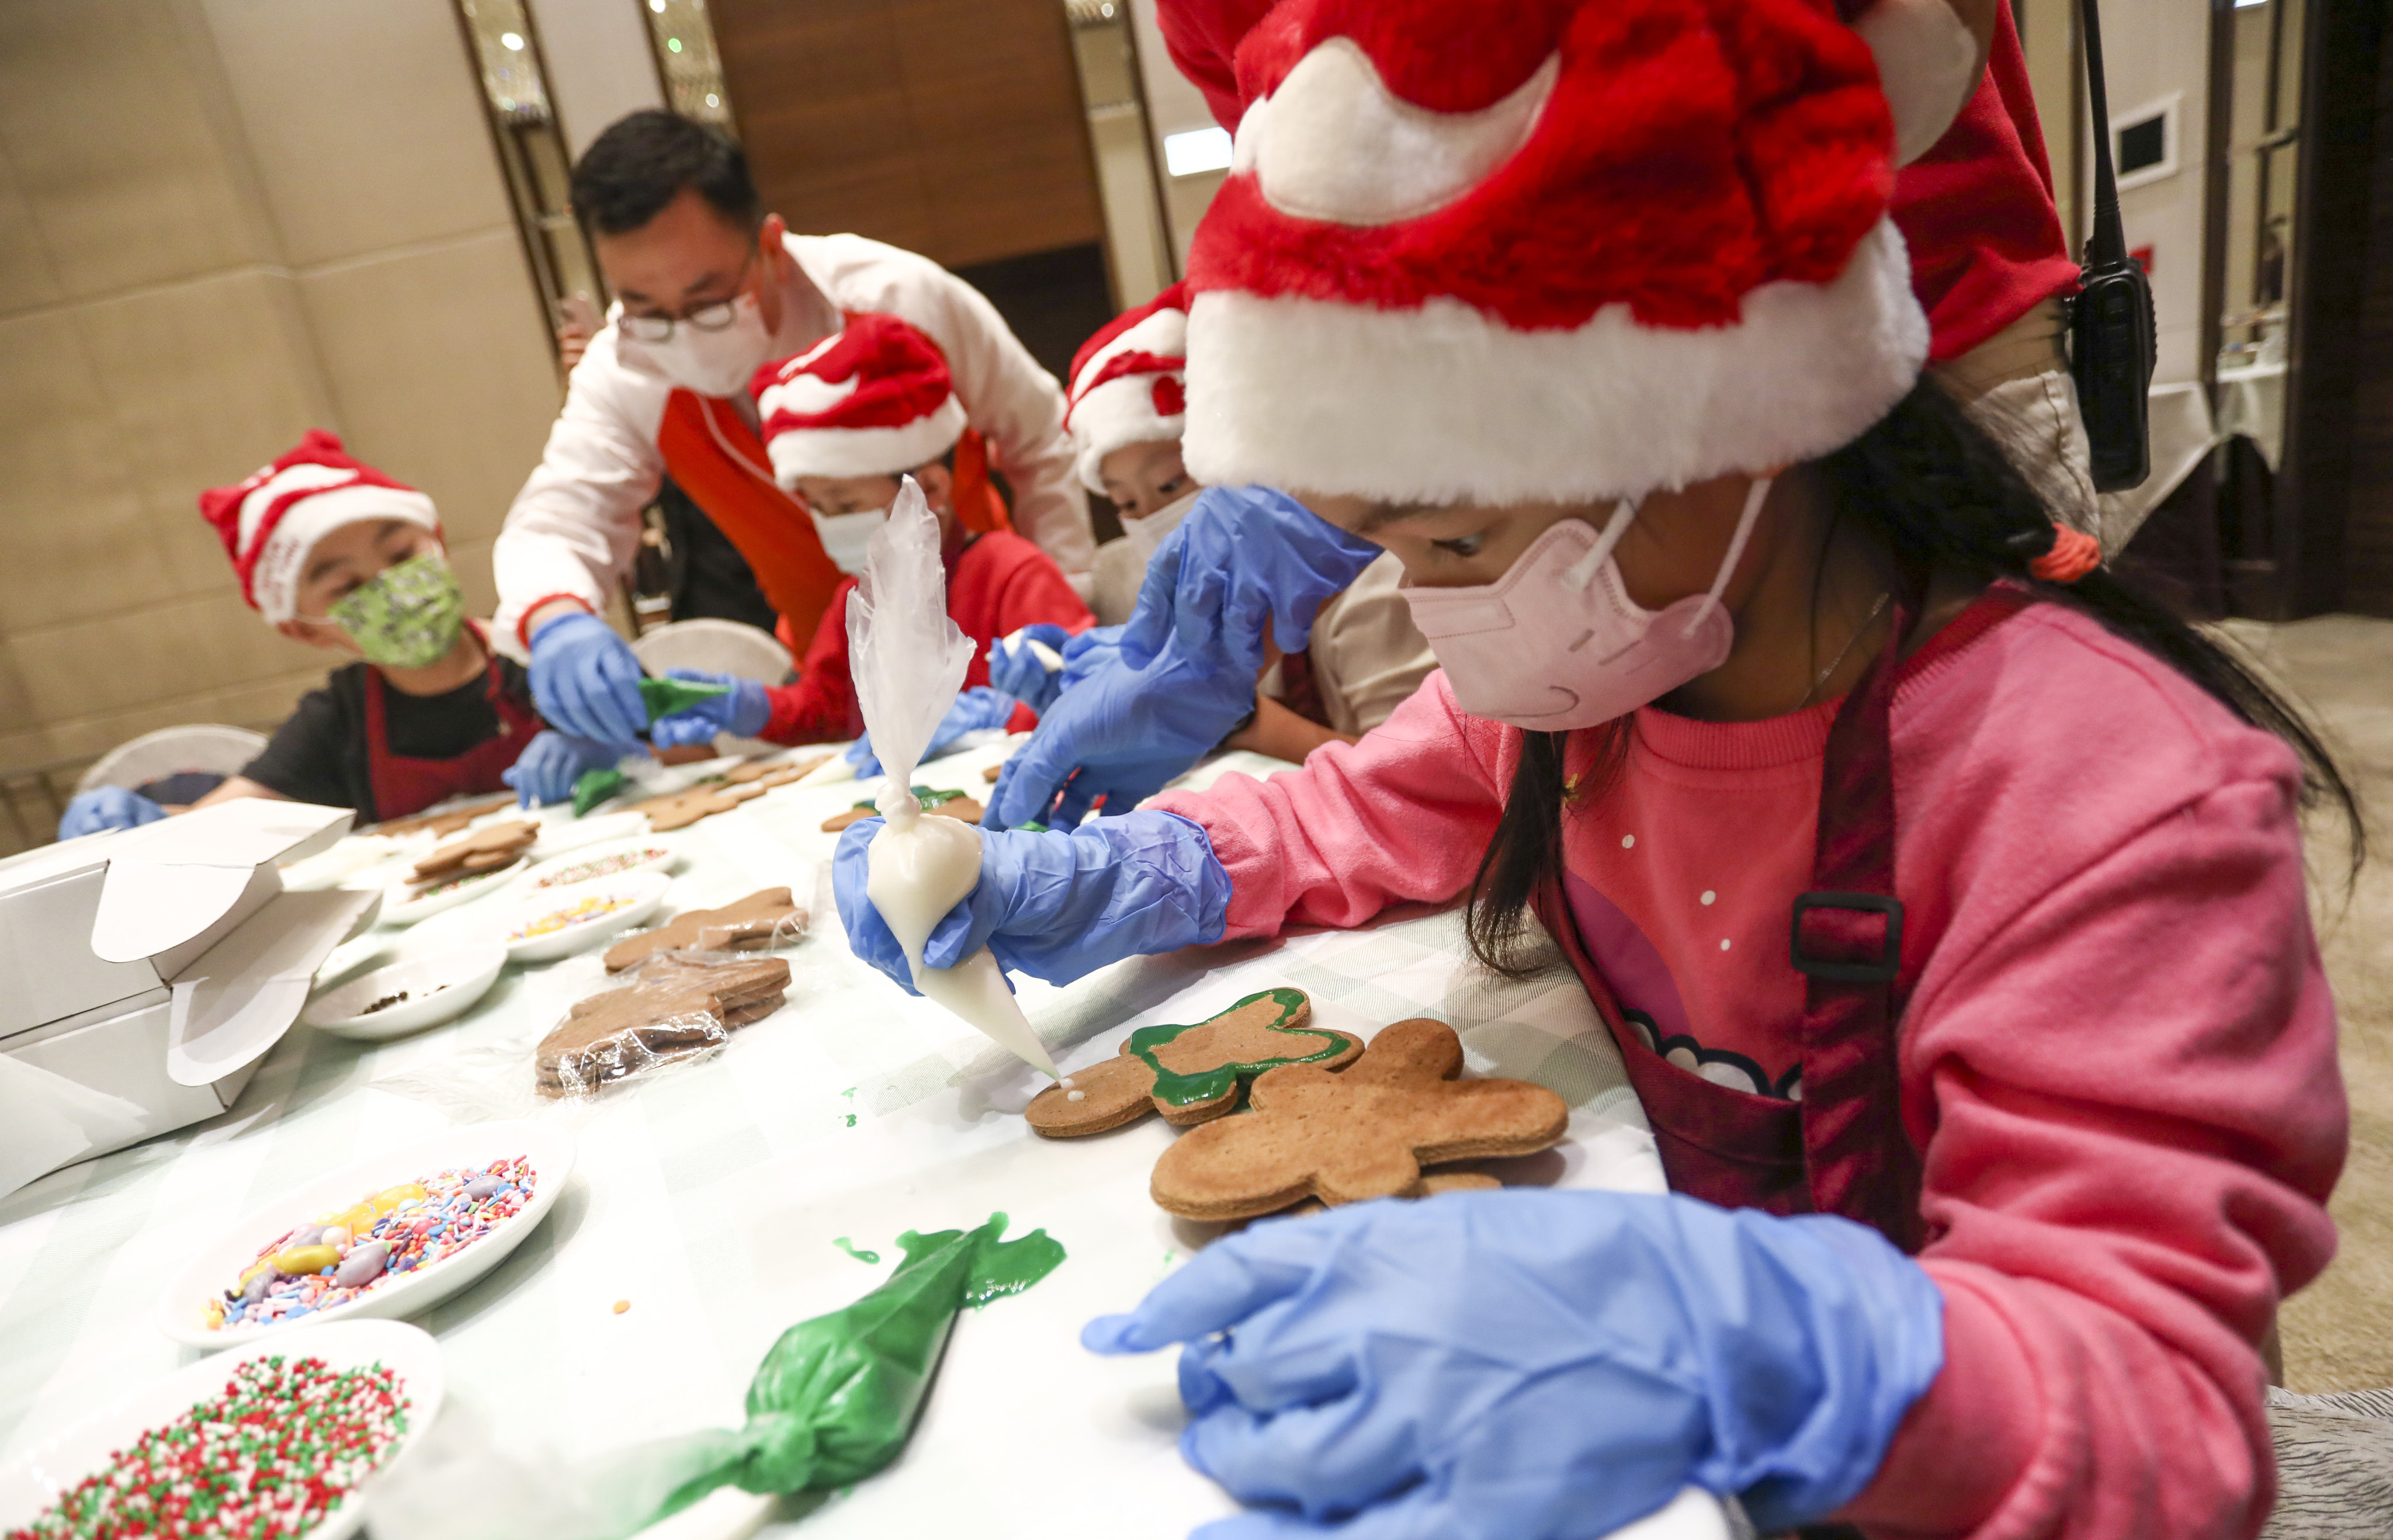 The Hong Kong Gold Coast Hotel last month welcomed 15 children from underprivileged familes for a day of Christmas activities, including making gingerbread men. Photo: Jonathan Wong